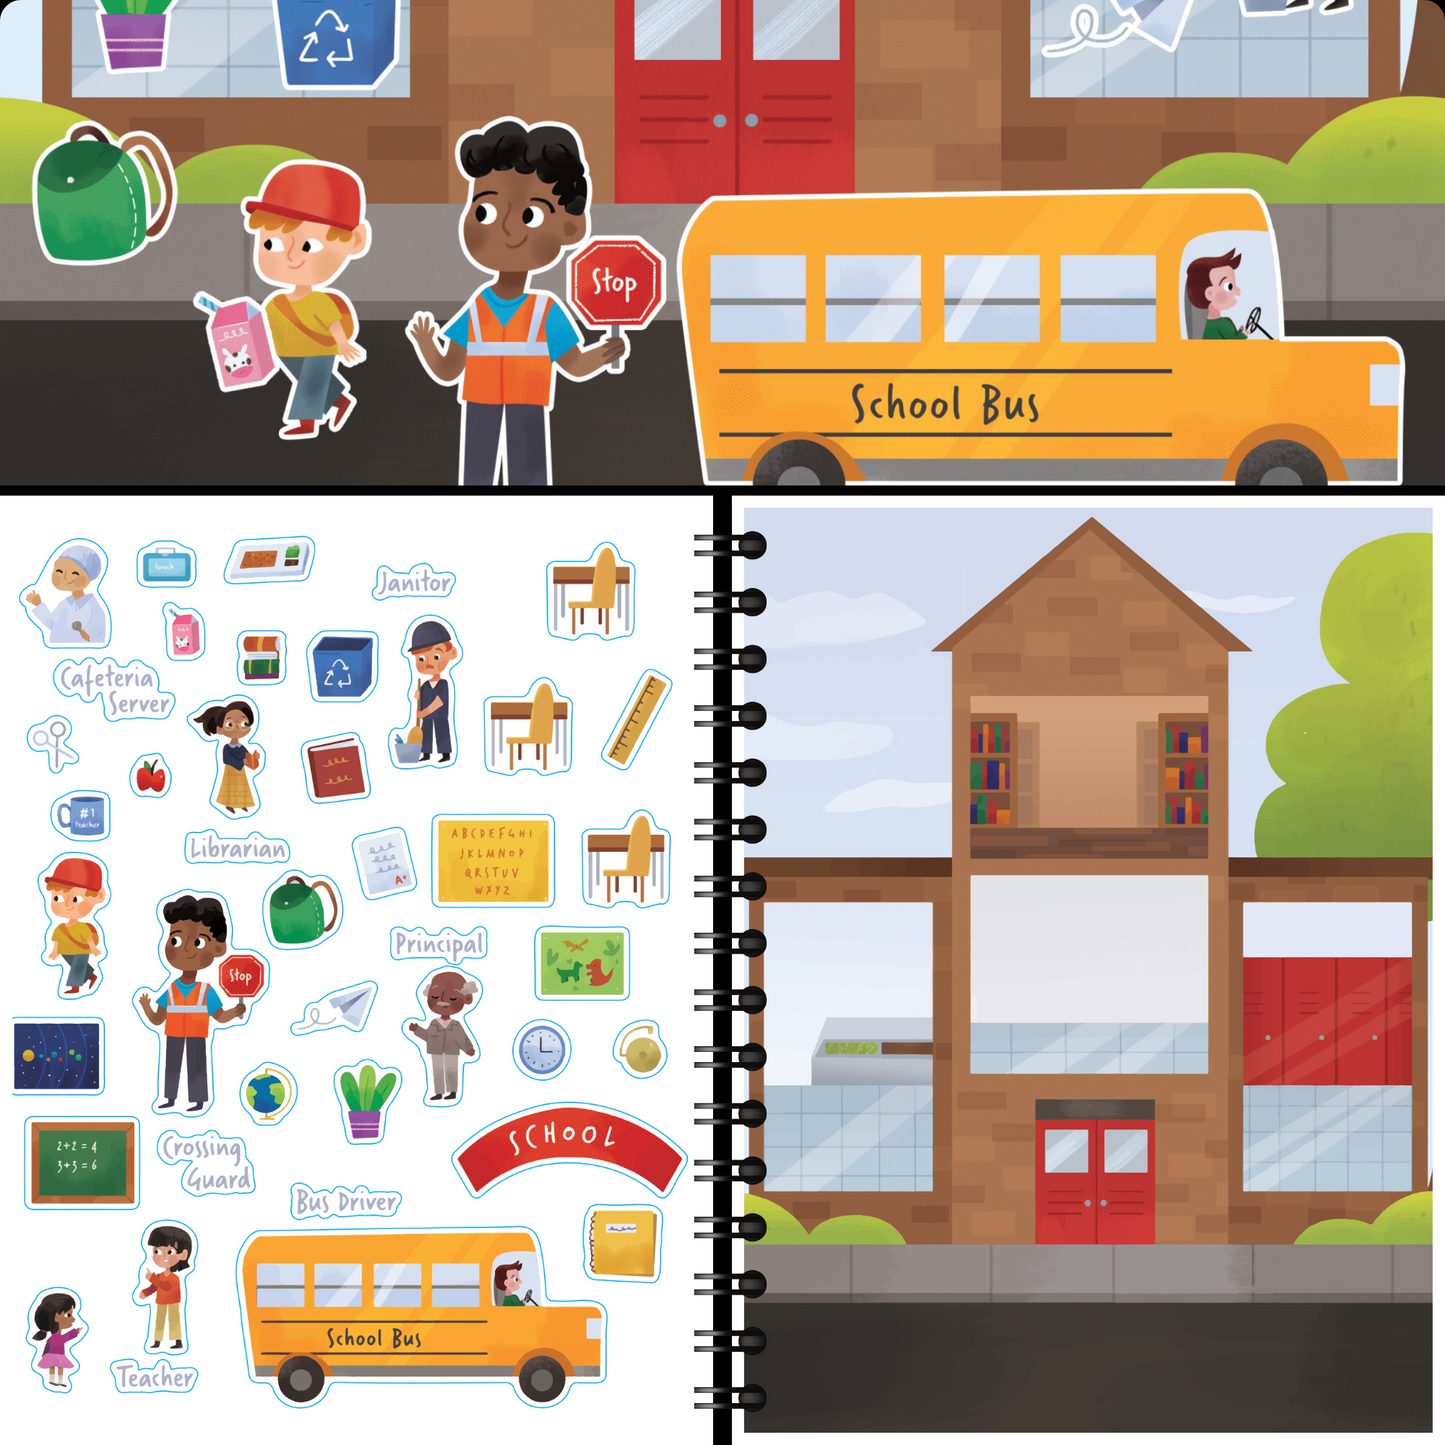 Occupations and Jobs Sticker Book